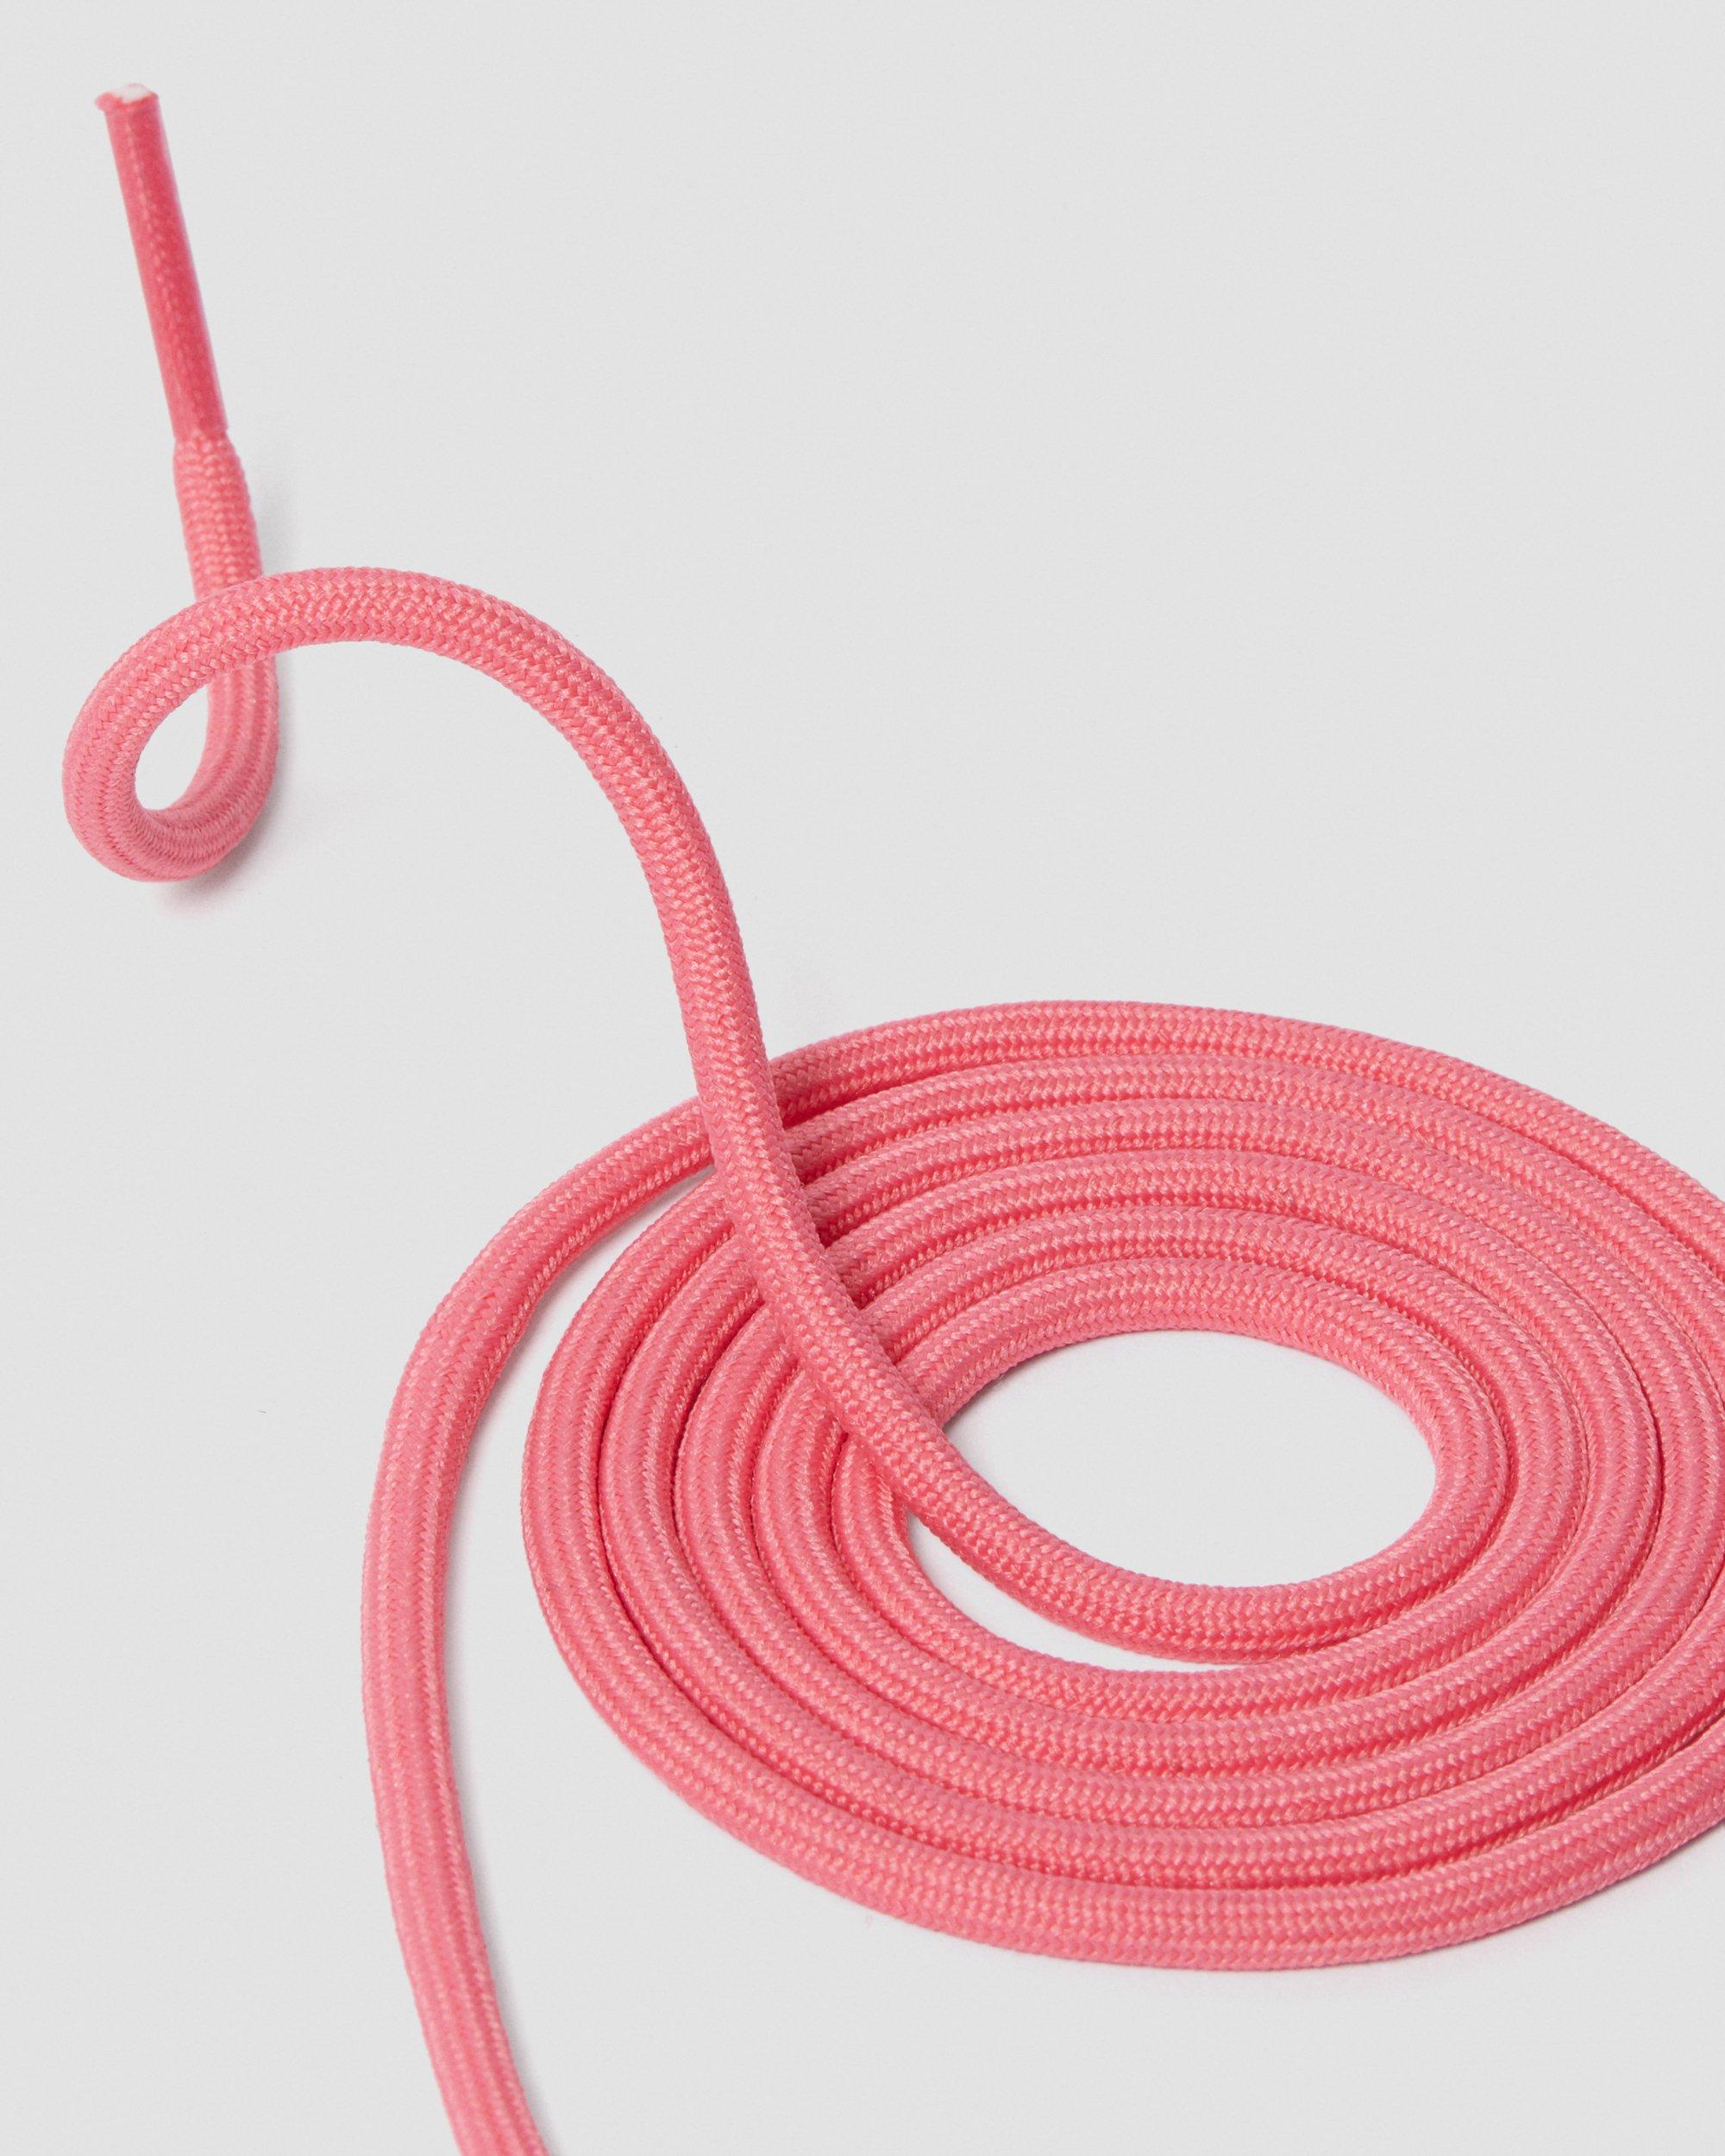 55 Inch Round Shoe Laces (8-10 Eye) in Pink